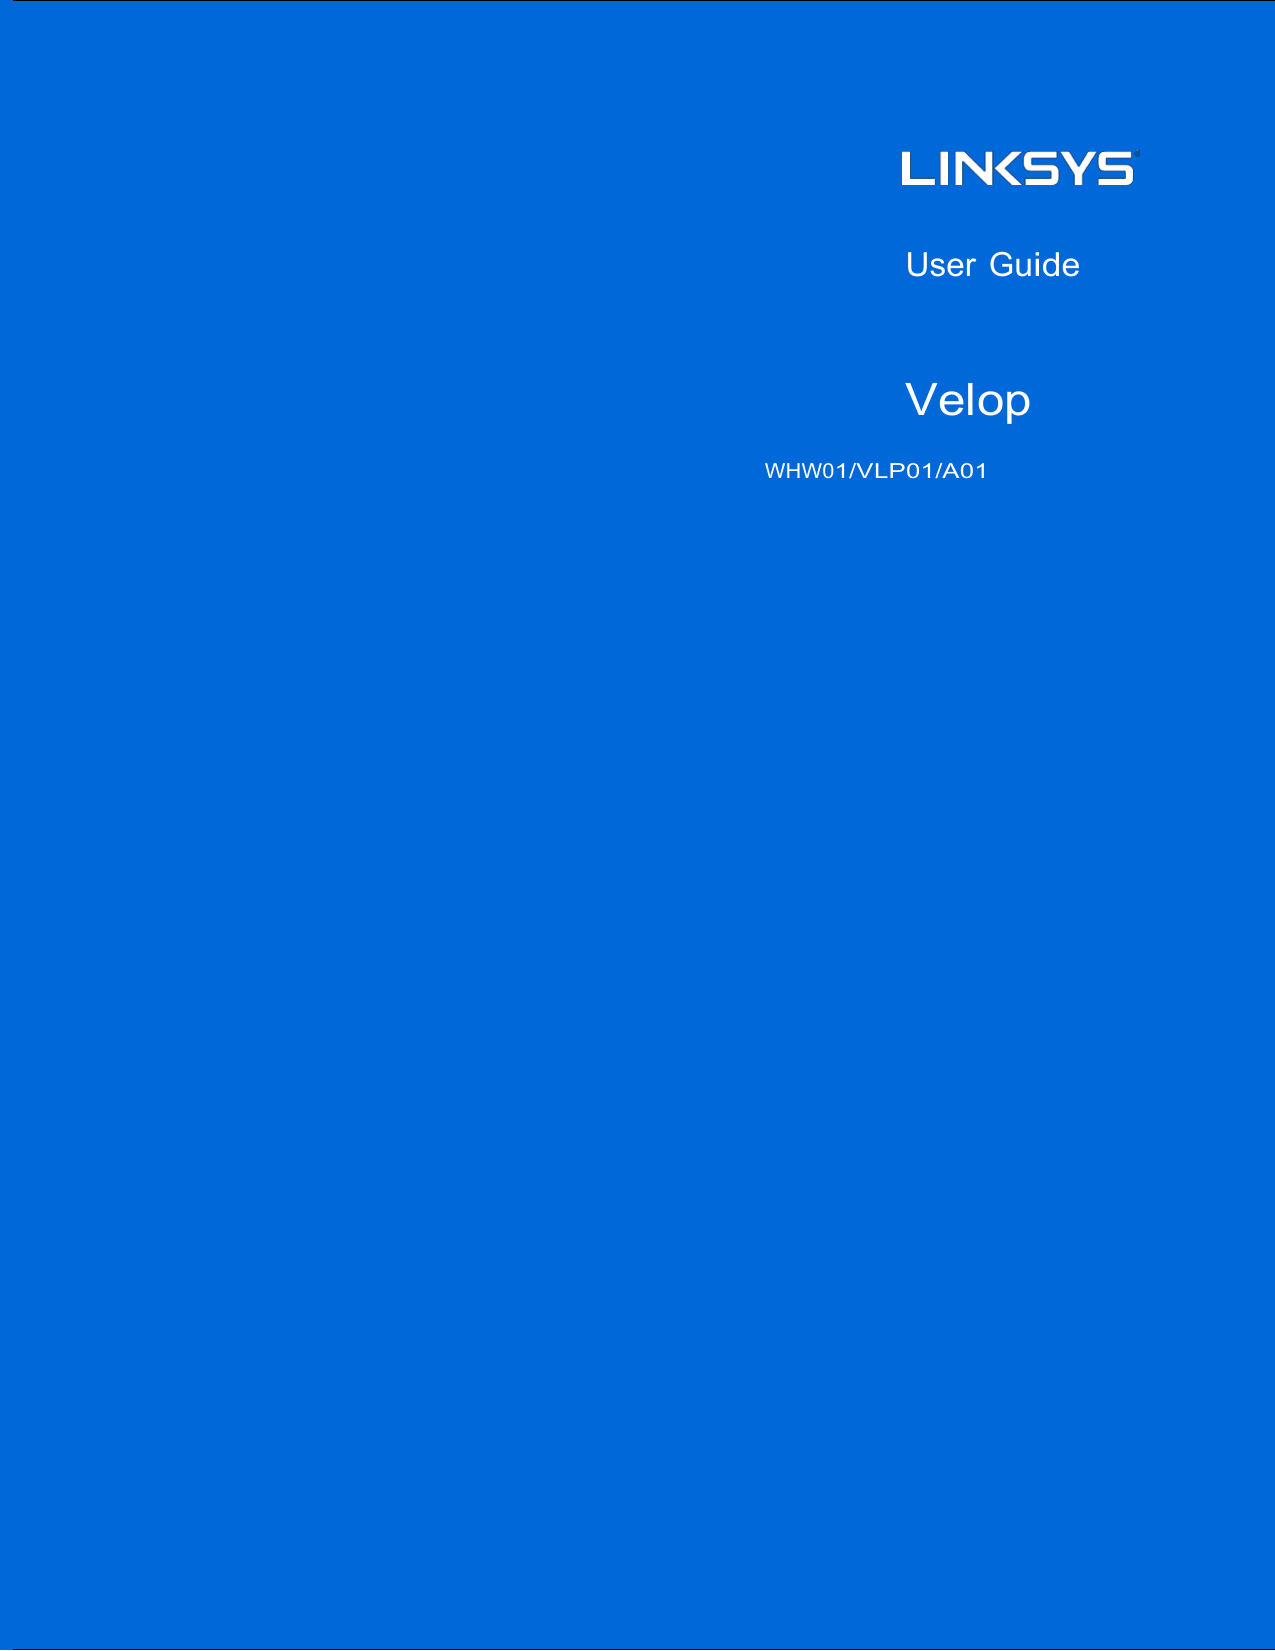        z                                                                  1     User Guide     Velop   WHW01/VLP01/A01 